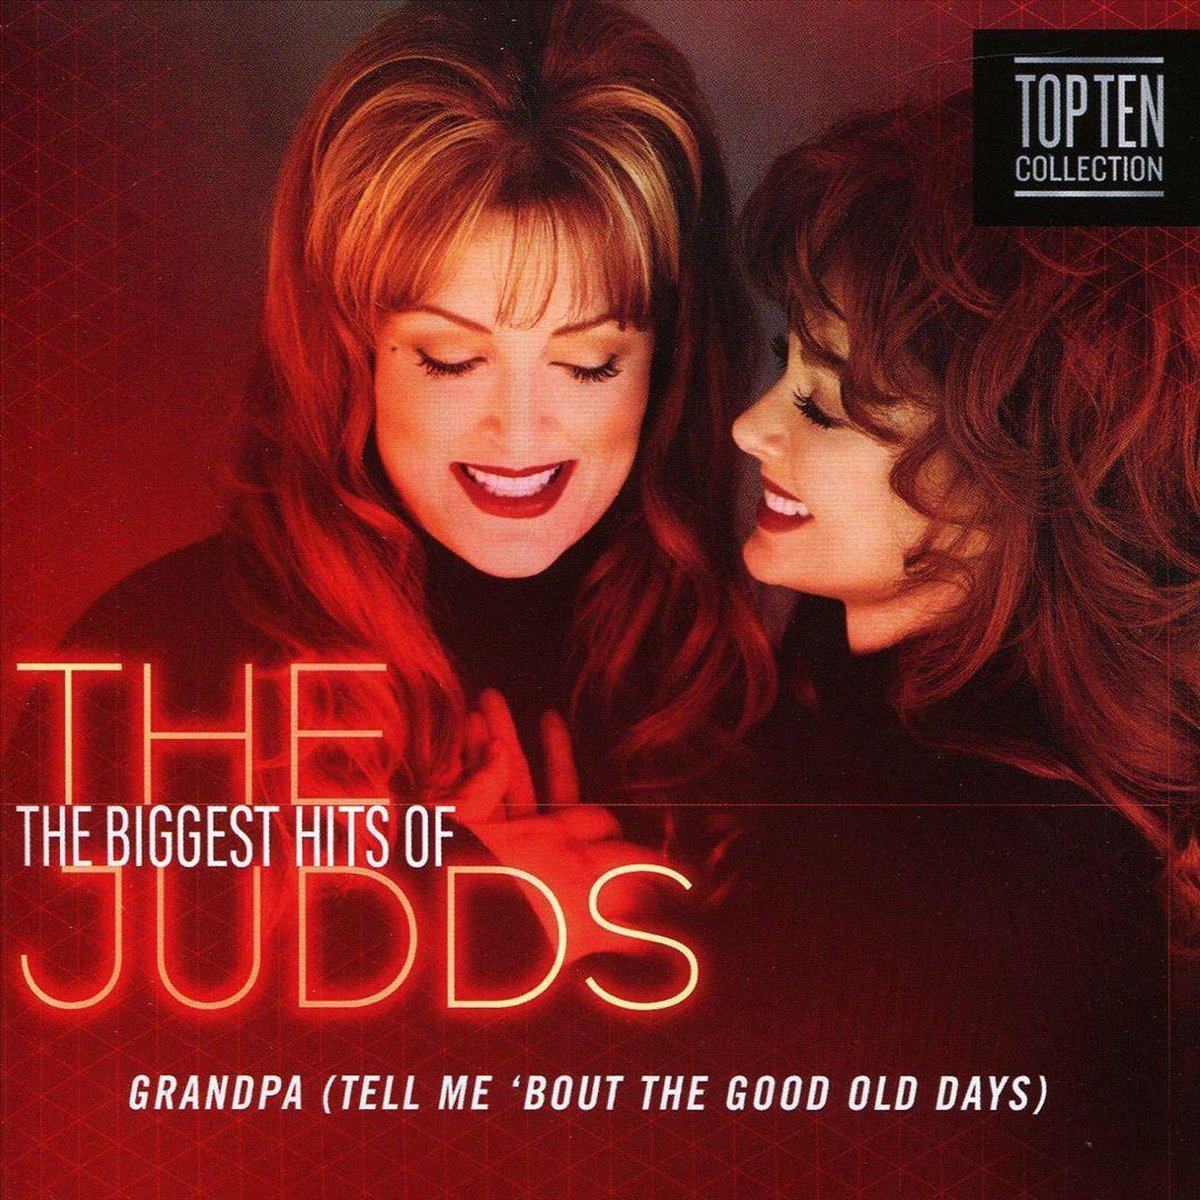 Biggest Hits of the Judds - The Judds